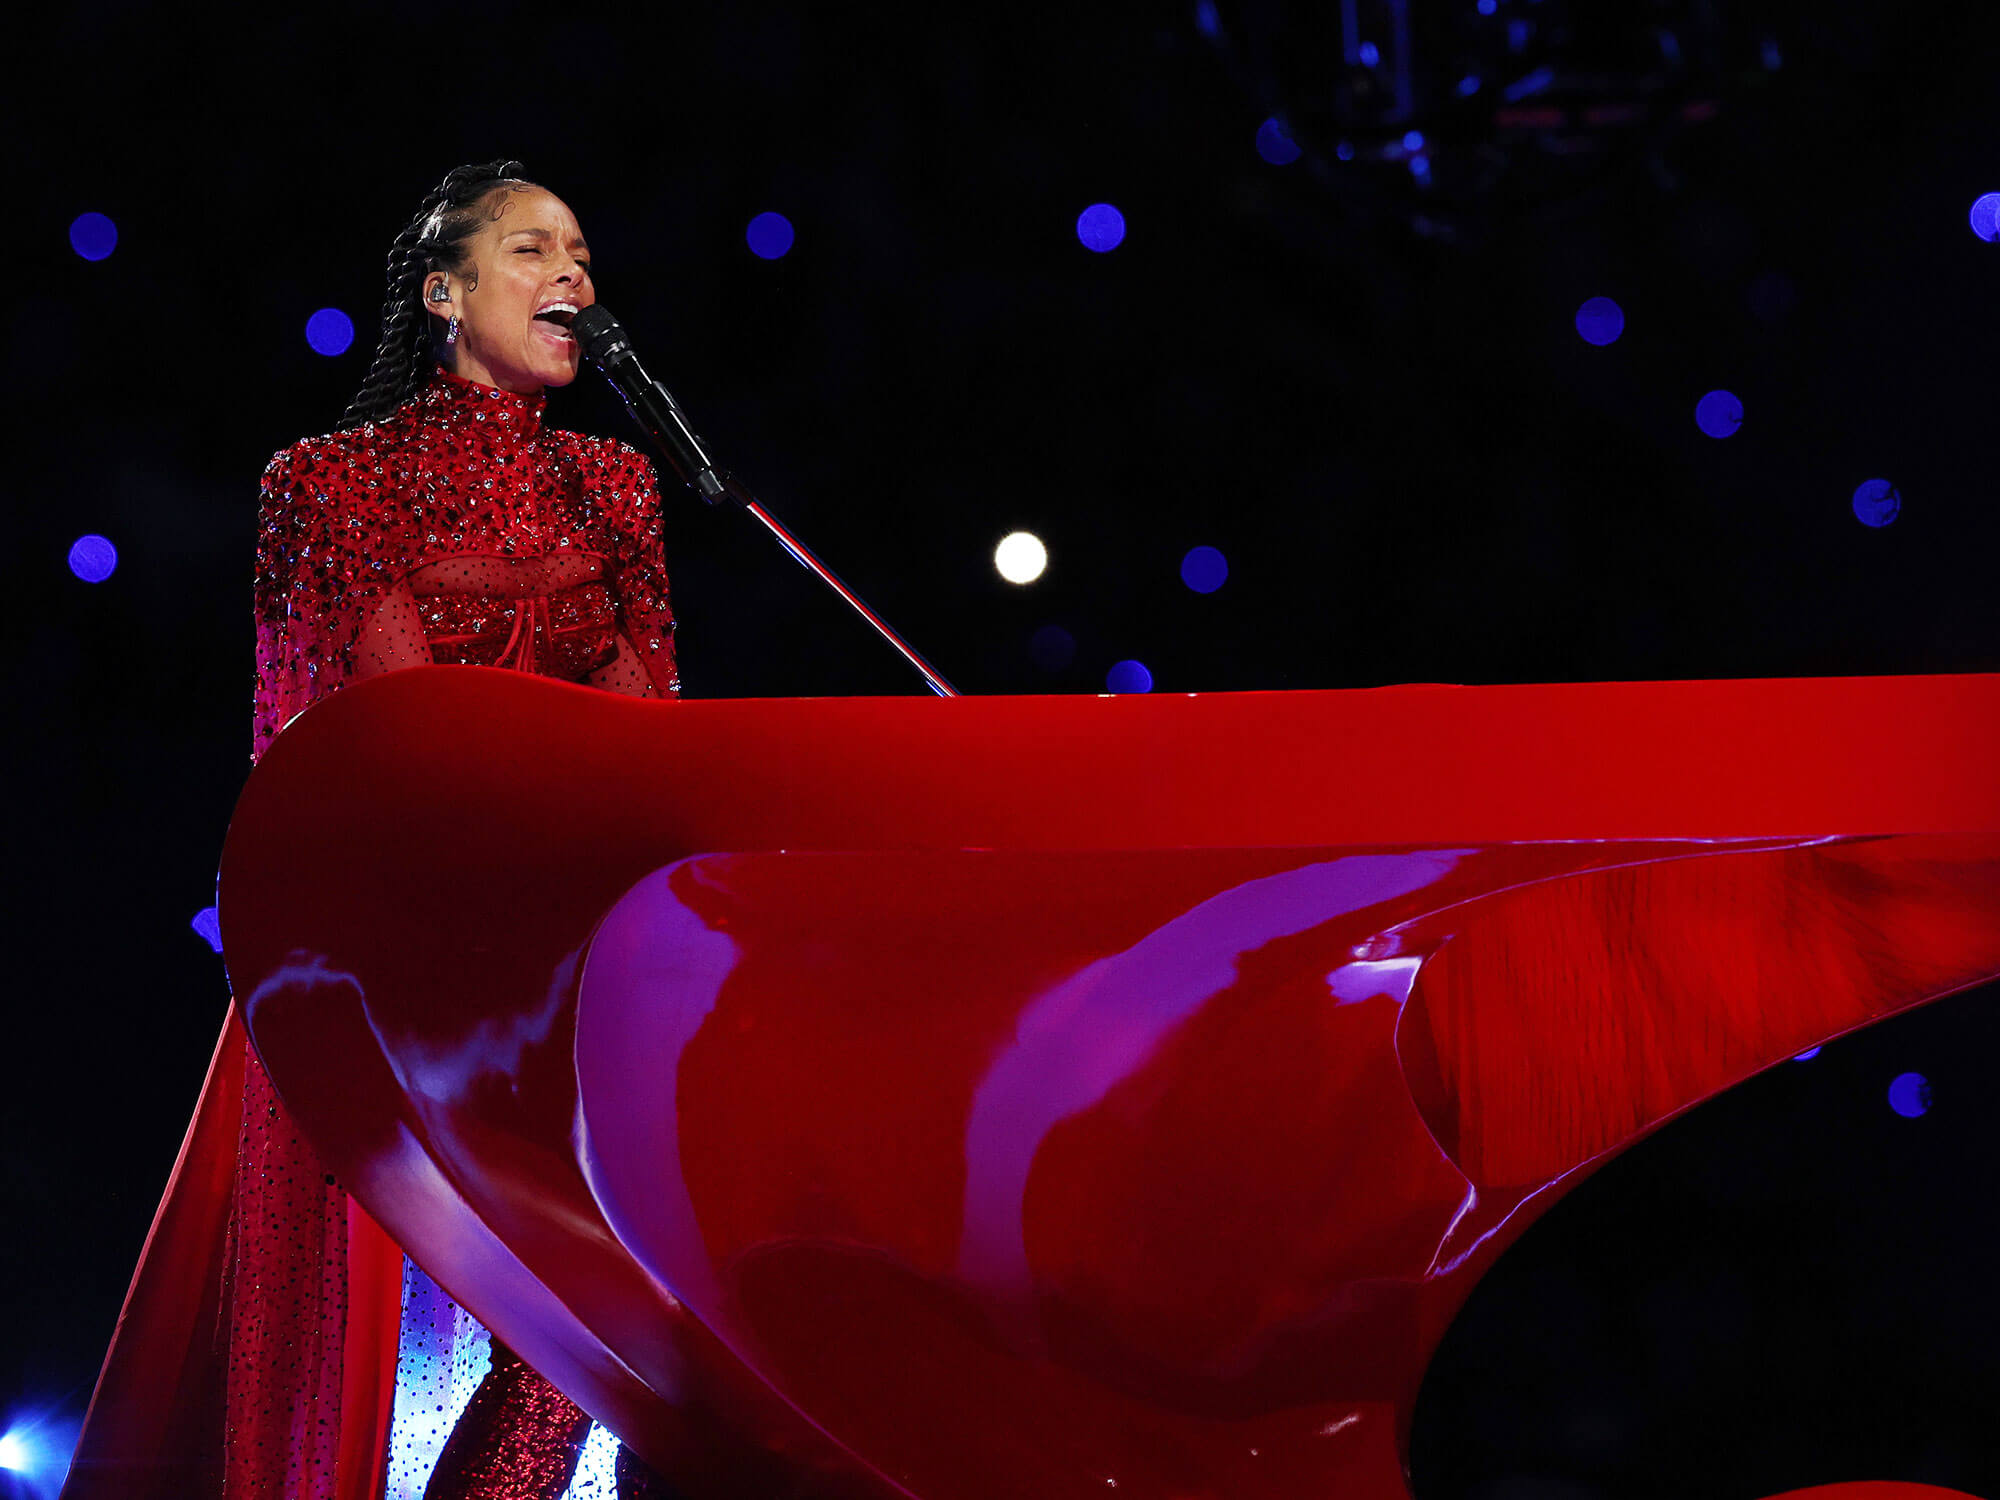 Alicia Keys performing live during the Super Bowl Halftime Show